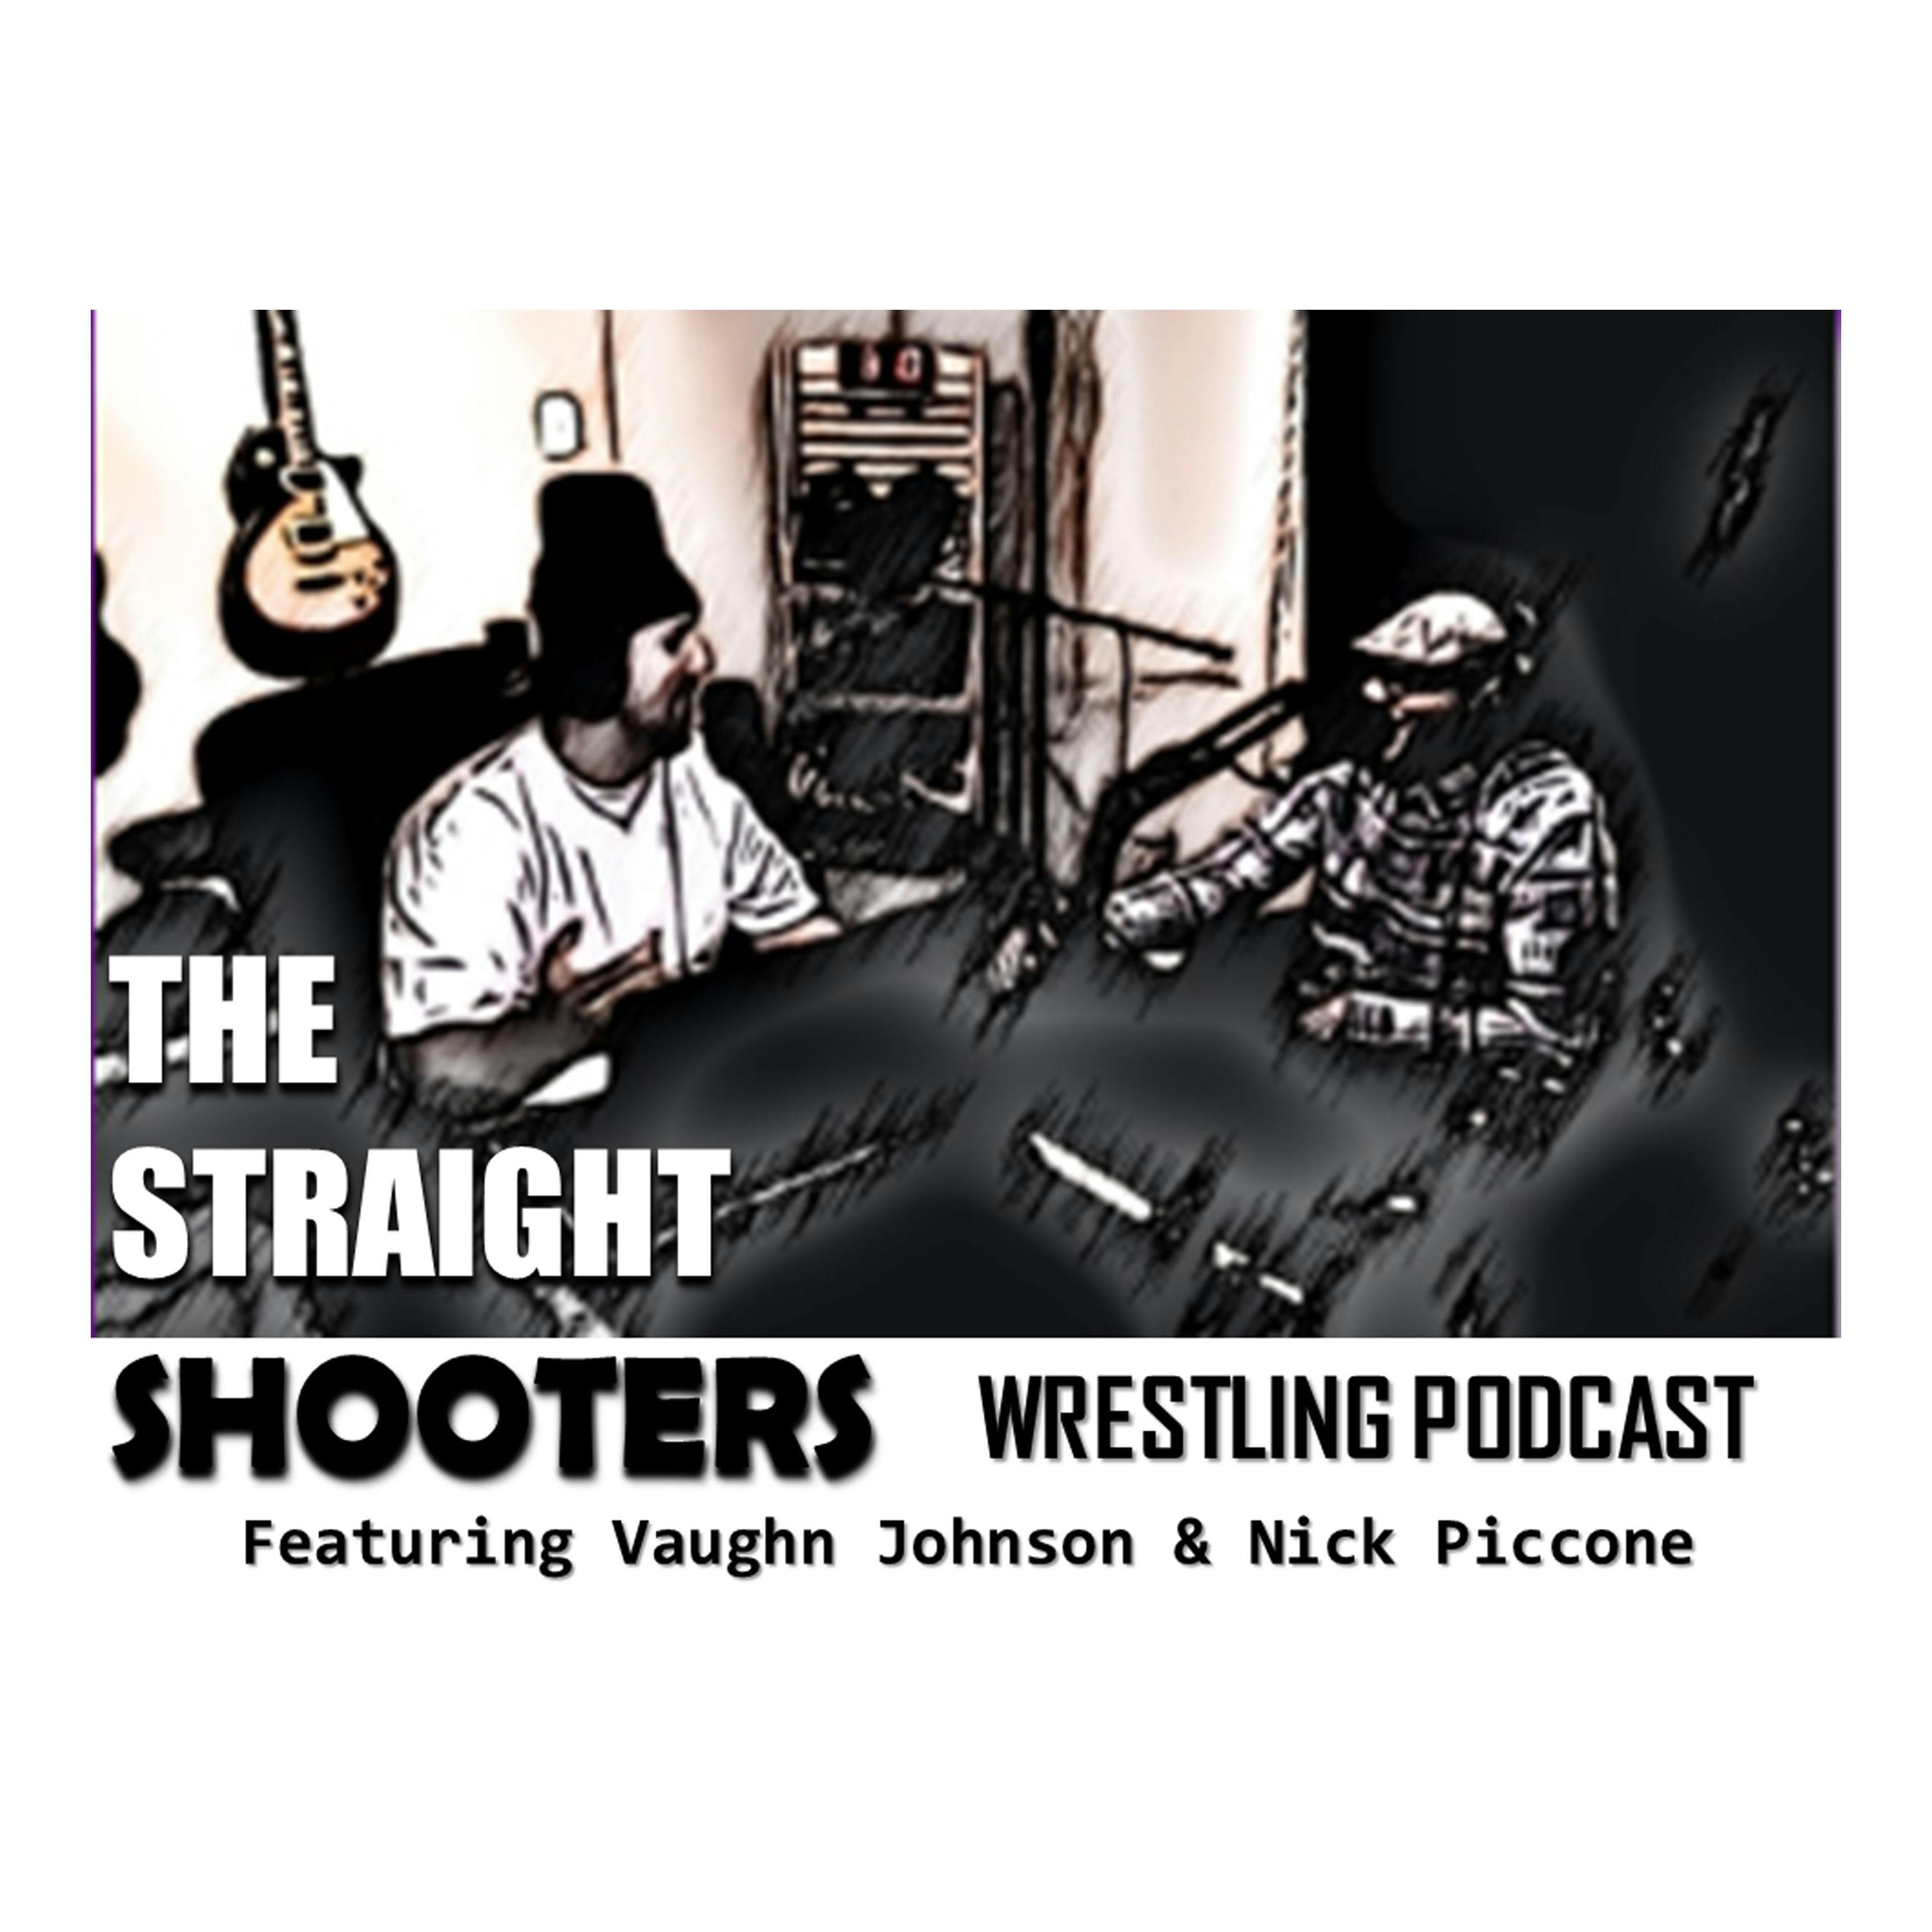 EP 172 | Hart-Backlund SS ’94, Flair-Rhodes Starrcade ’85 Live Commentary | 11/21/18 Image